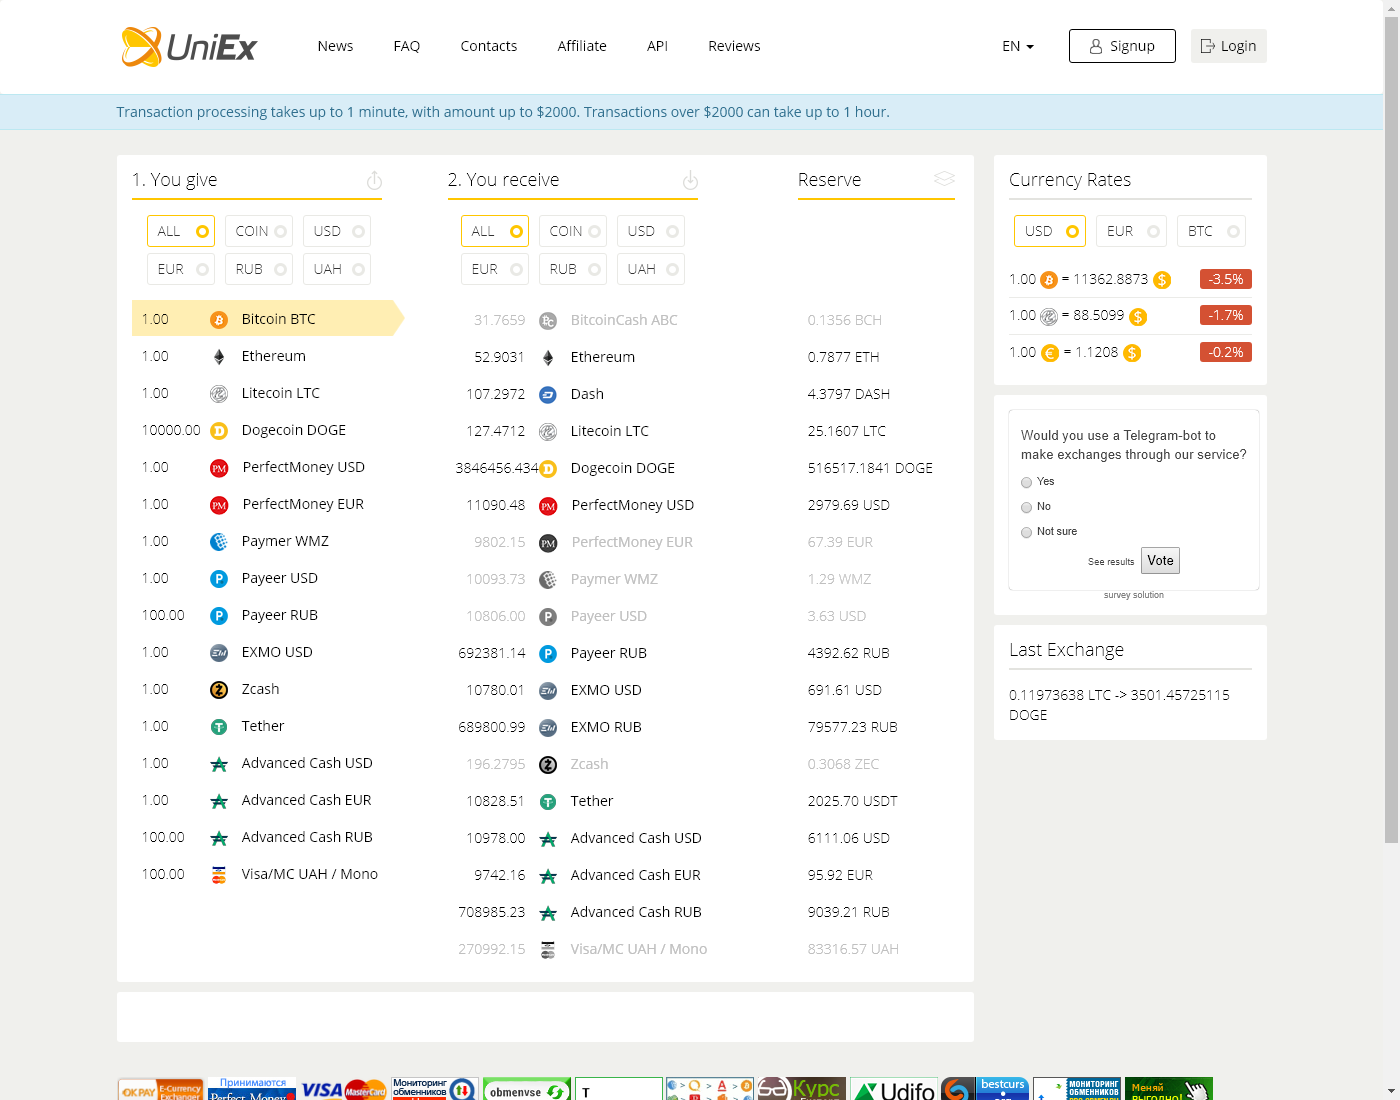 UniEx user interface: the home page in English